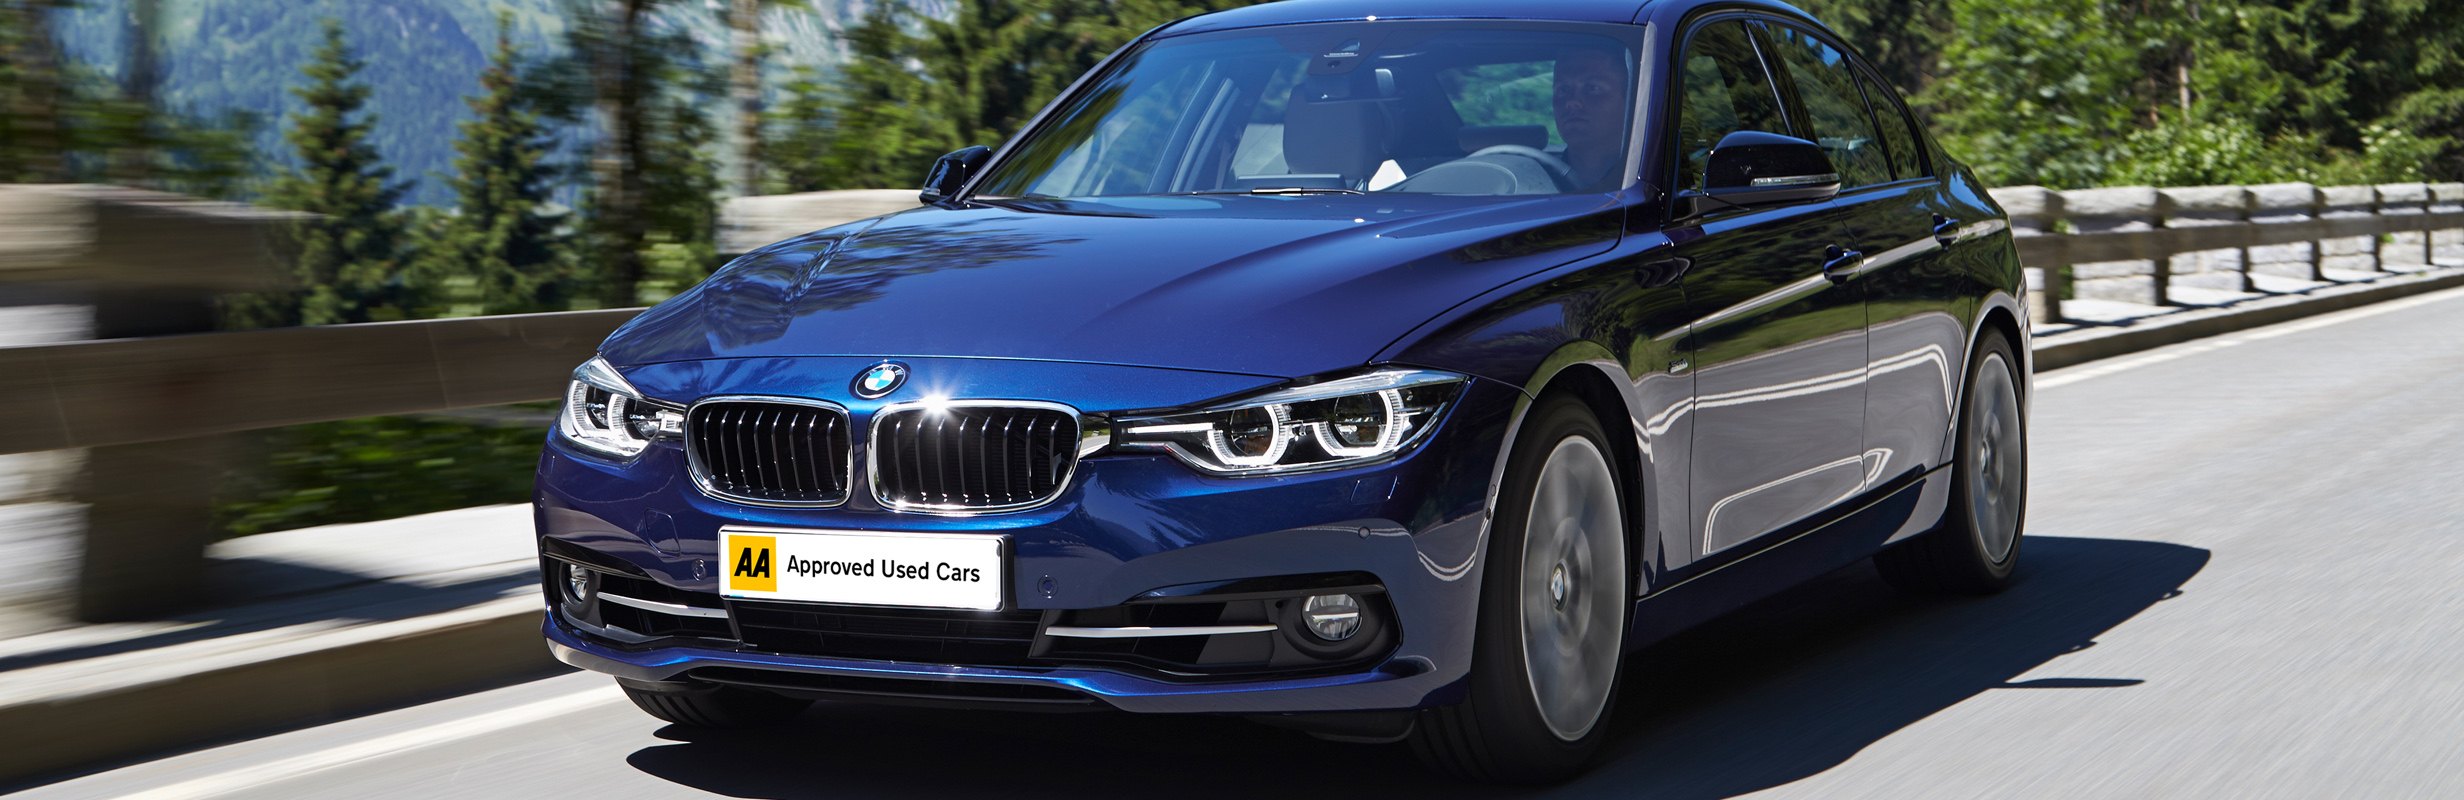 Used Car Review  BMW 3-Series Mark 6 (F30) - The AA